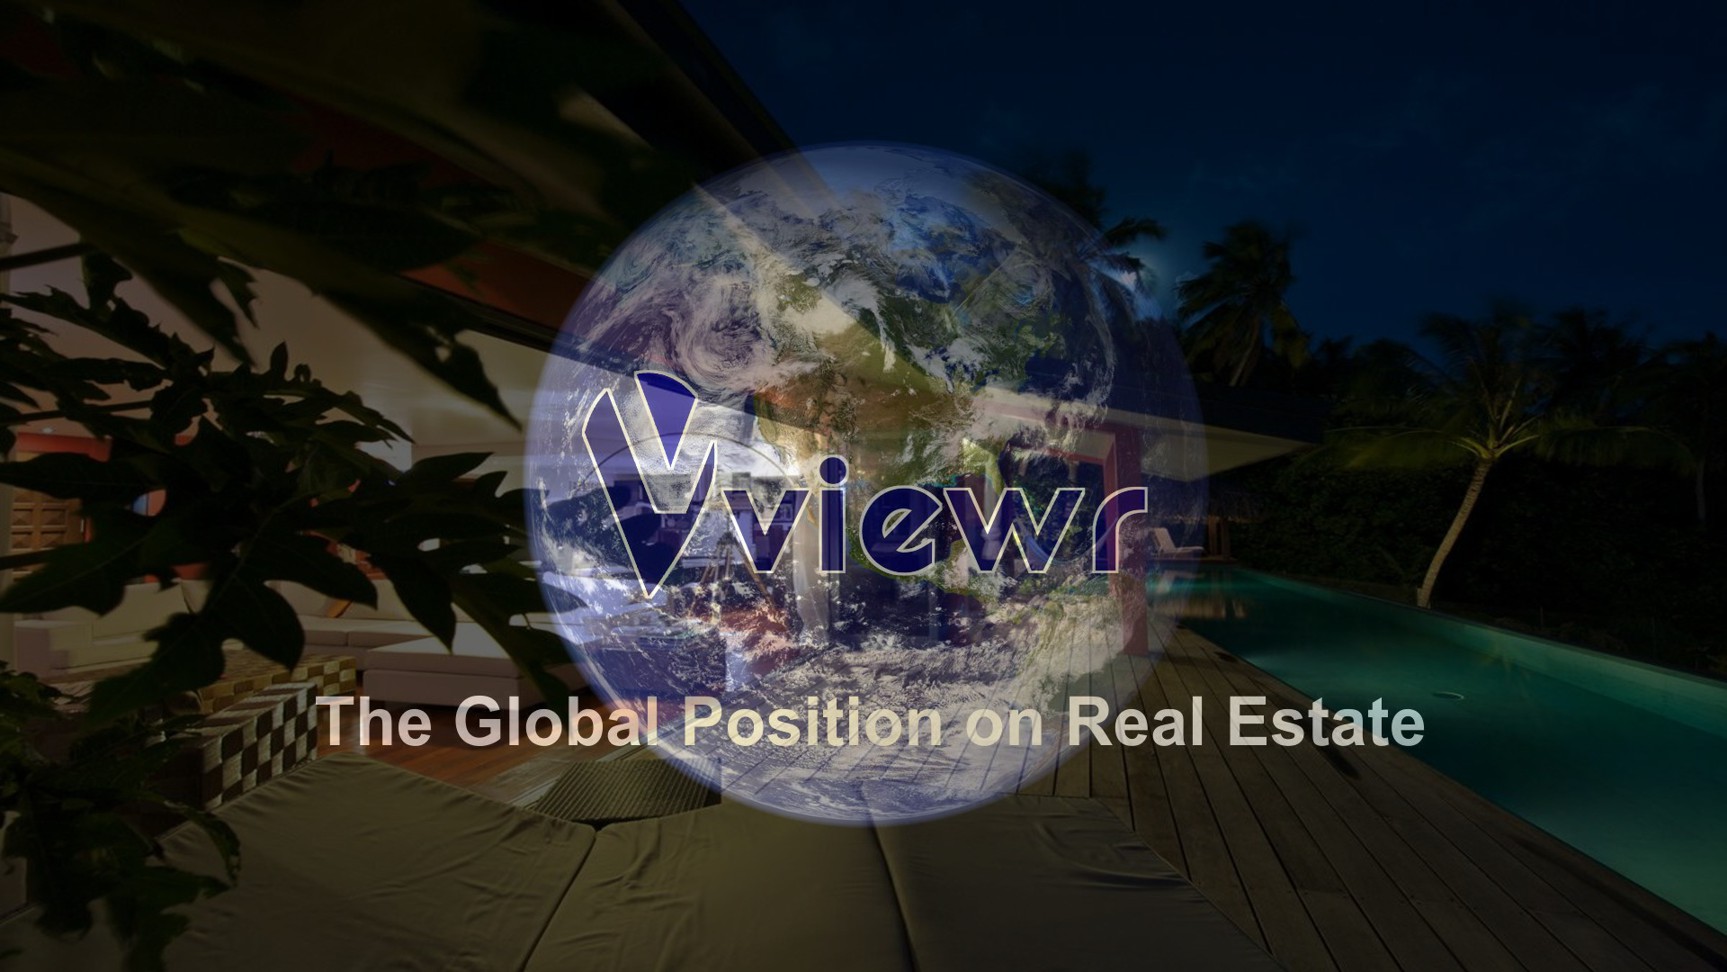 viewr : The Global Position on Real Estate